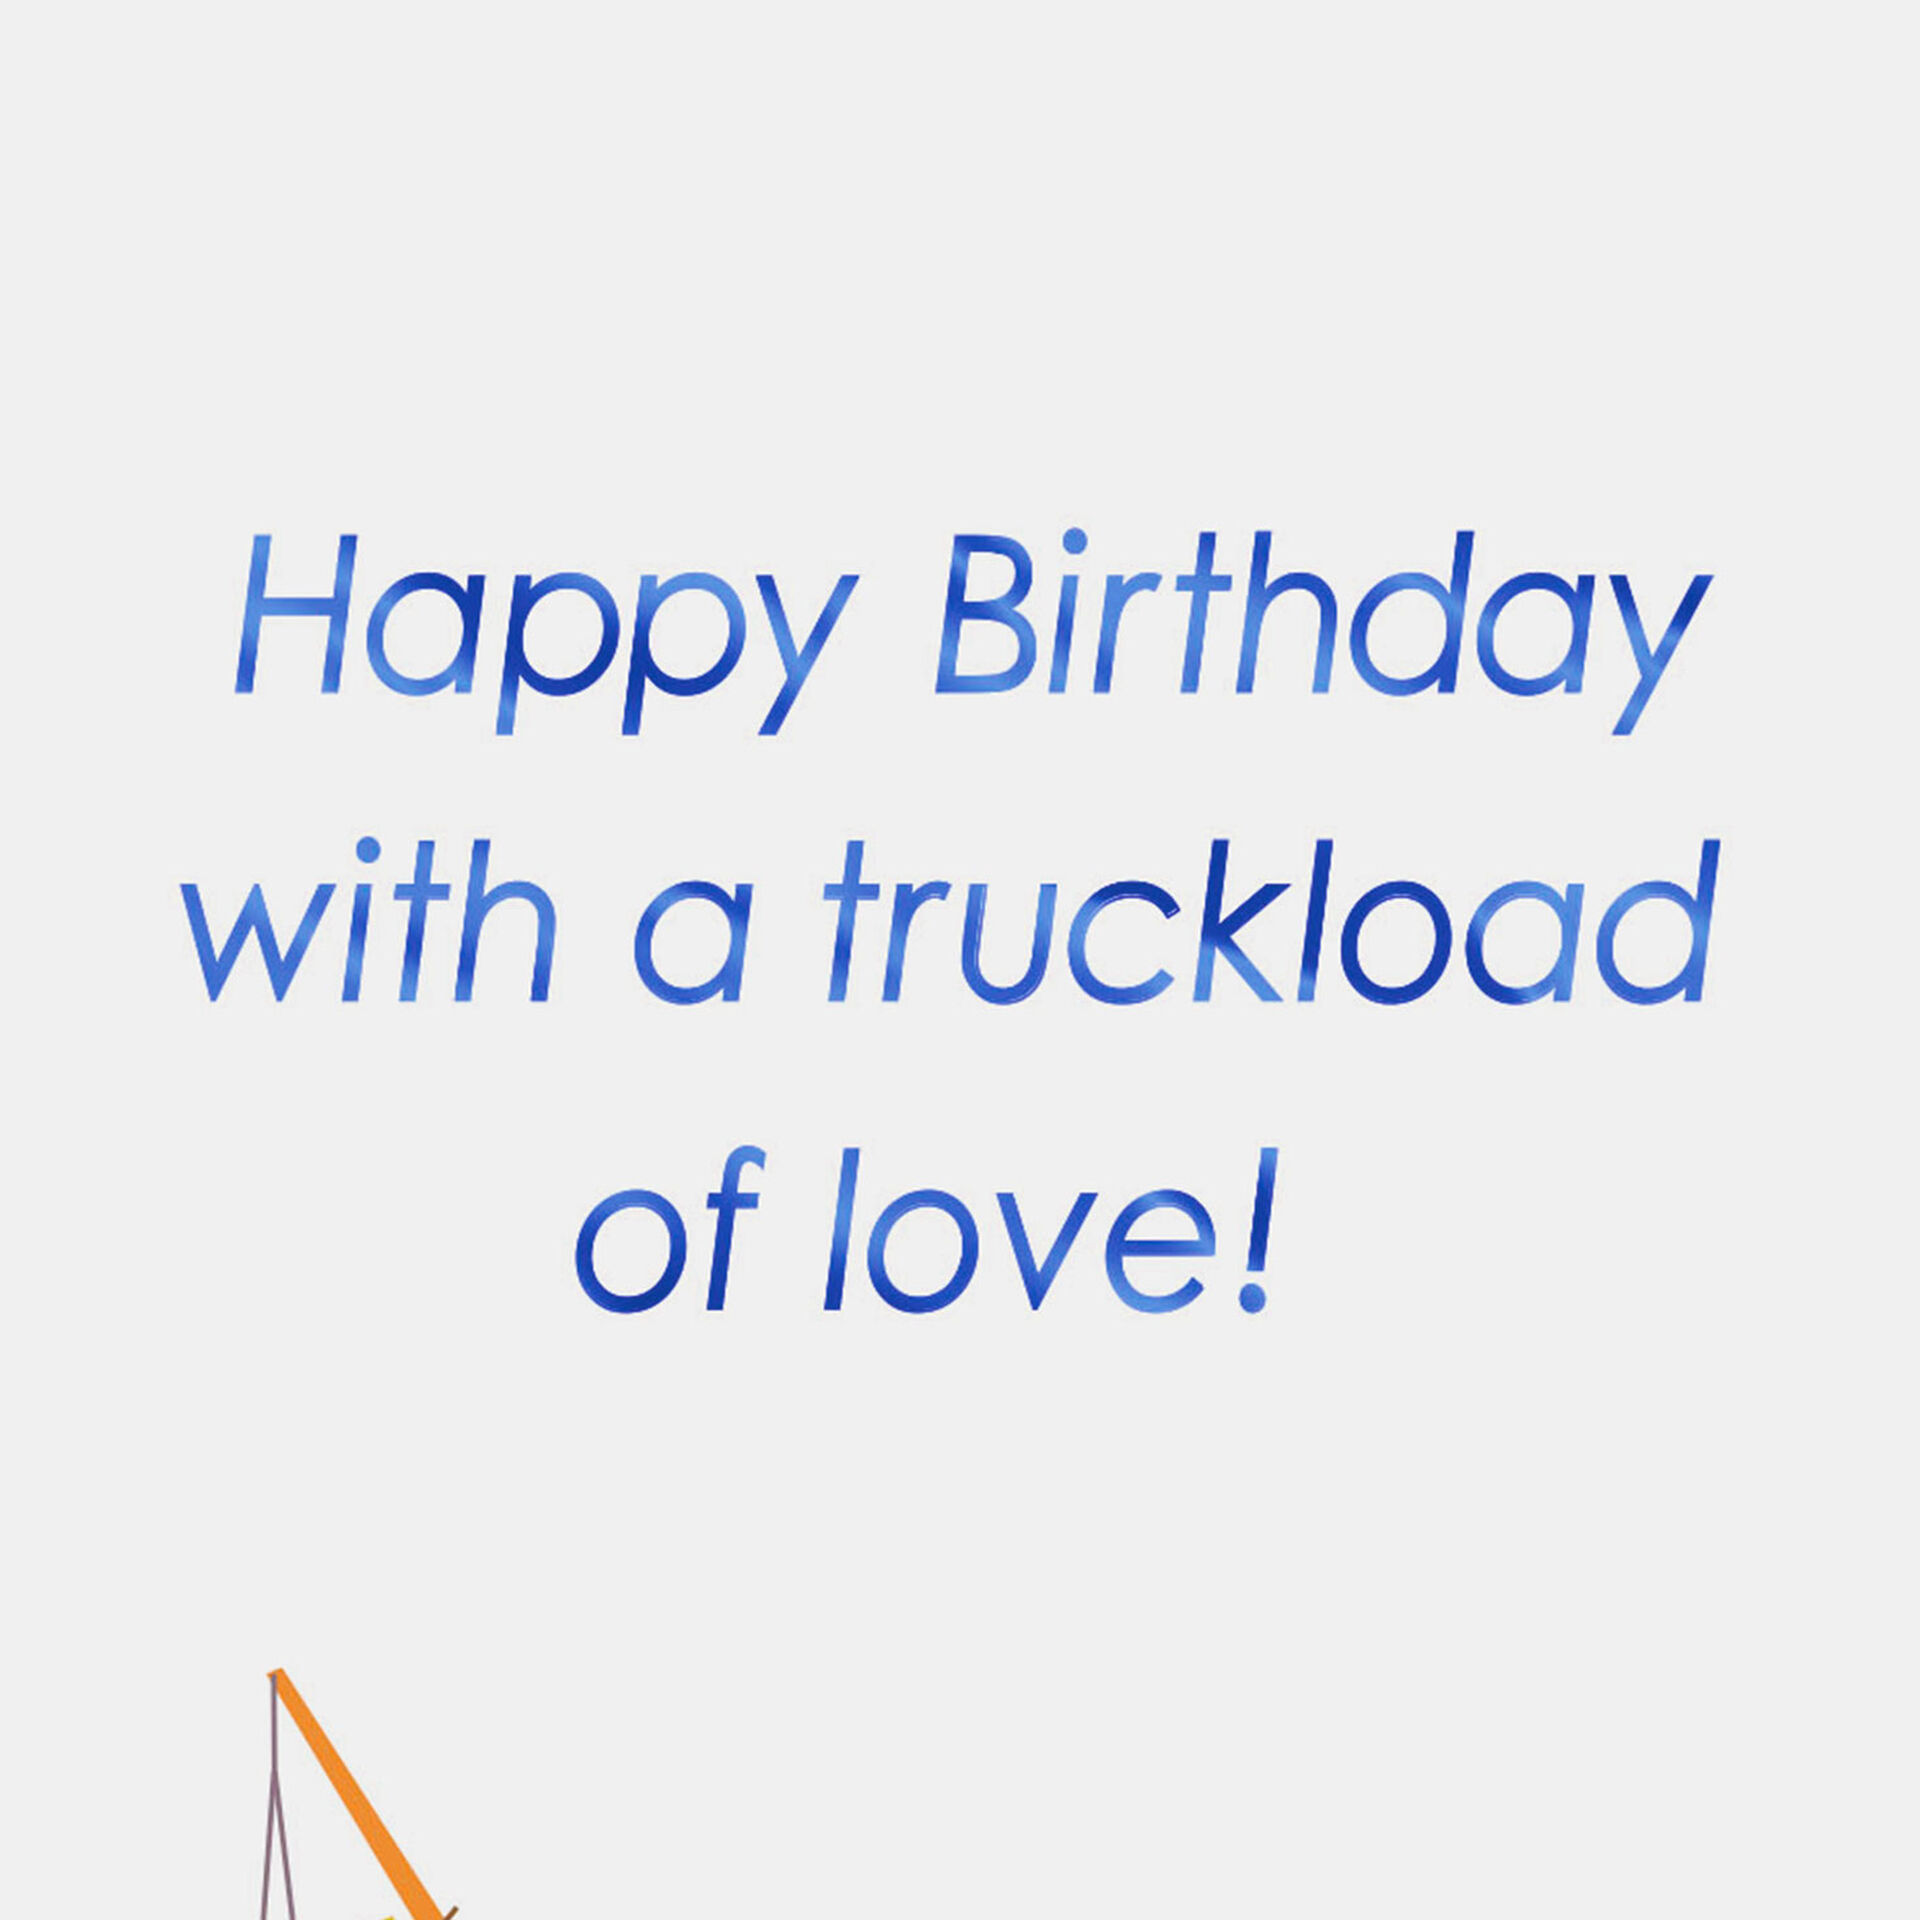 Dump-Truck-With-Balloons-Birthday-Card-for-Grandson_299HKB5842_02